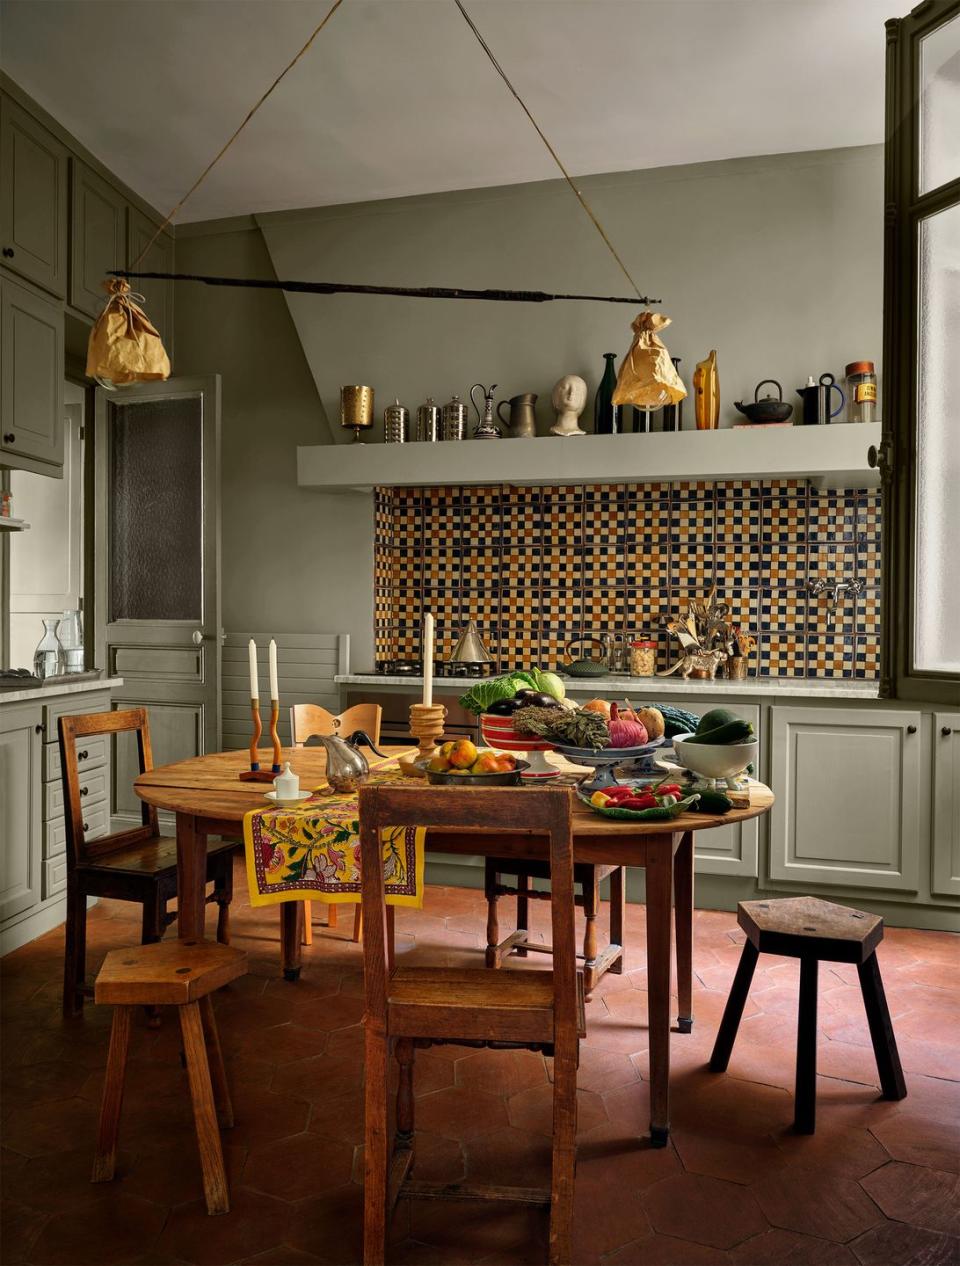 a kitchen has muted sage colored walls, a checkerboard tile backsplash and a shelf above it with vessels, round wood table with rustic chairs and stools, a triangle pendant, terra cotta floor